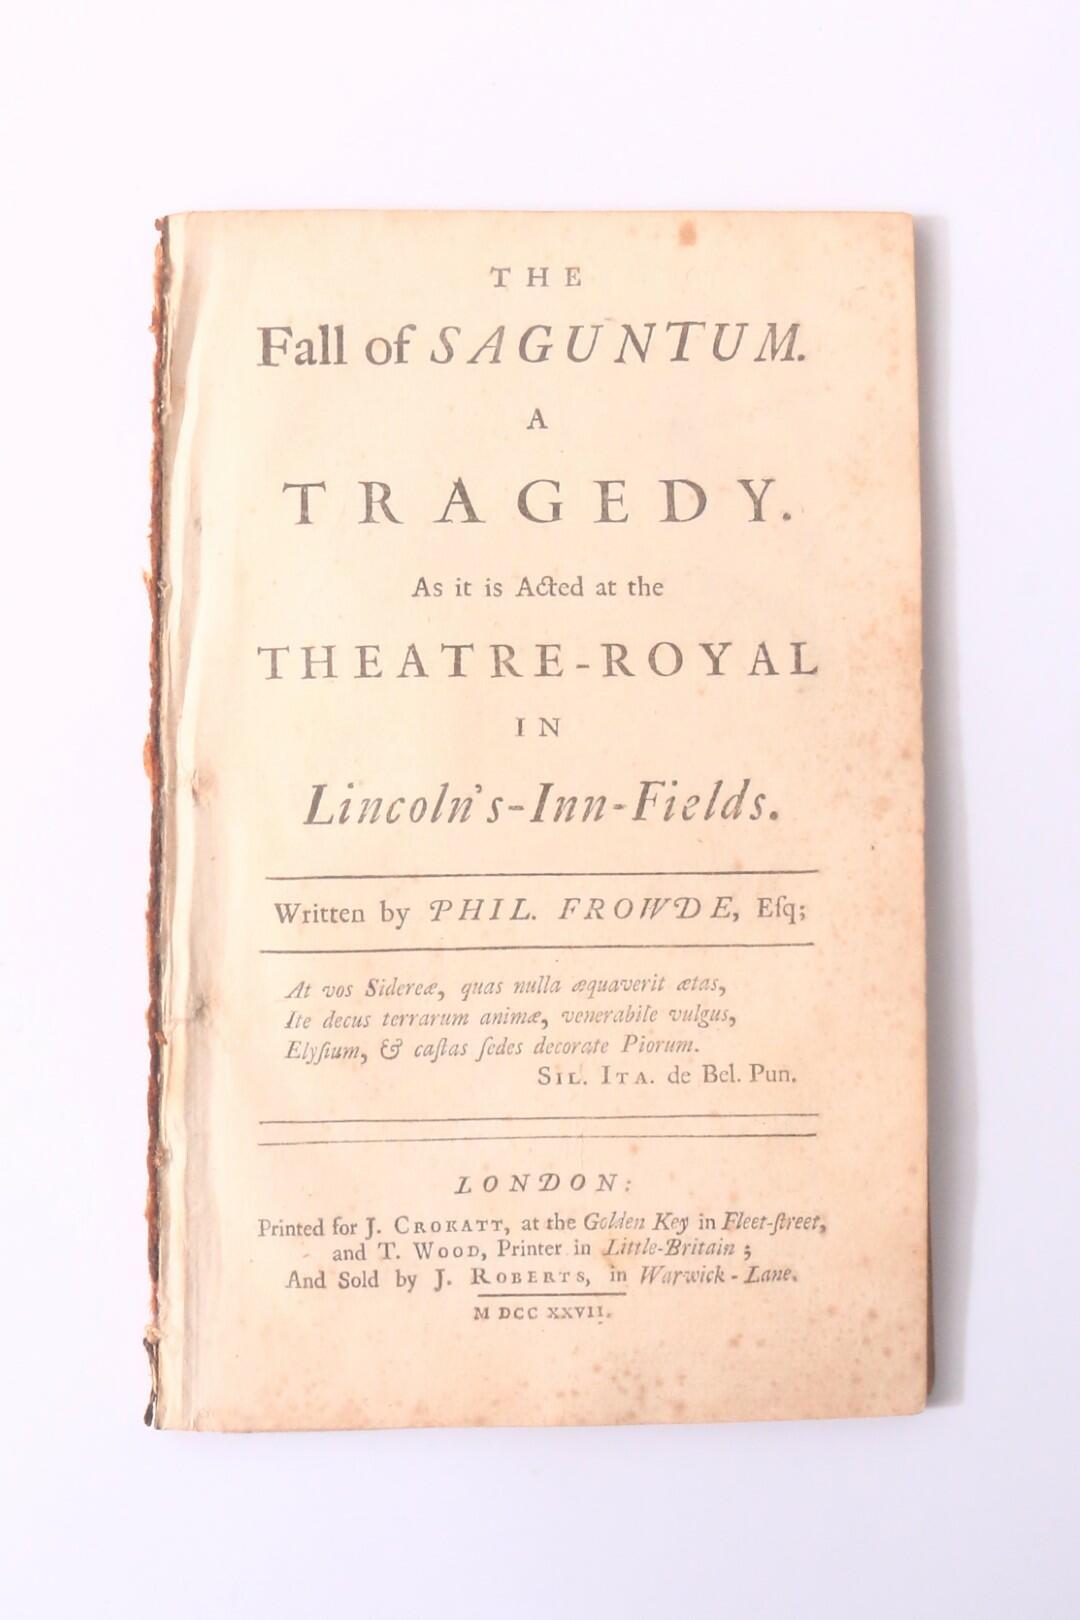 Phil Frowde - The Fall of Saguntum. A Tragedy. As it is Acted at the Theatre-Royal in Lincoln's-Inn-Fields - J. Crokatt and T. Wood, 1727, First Edition.